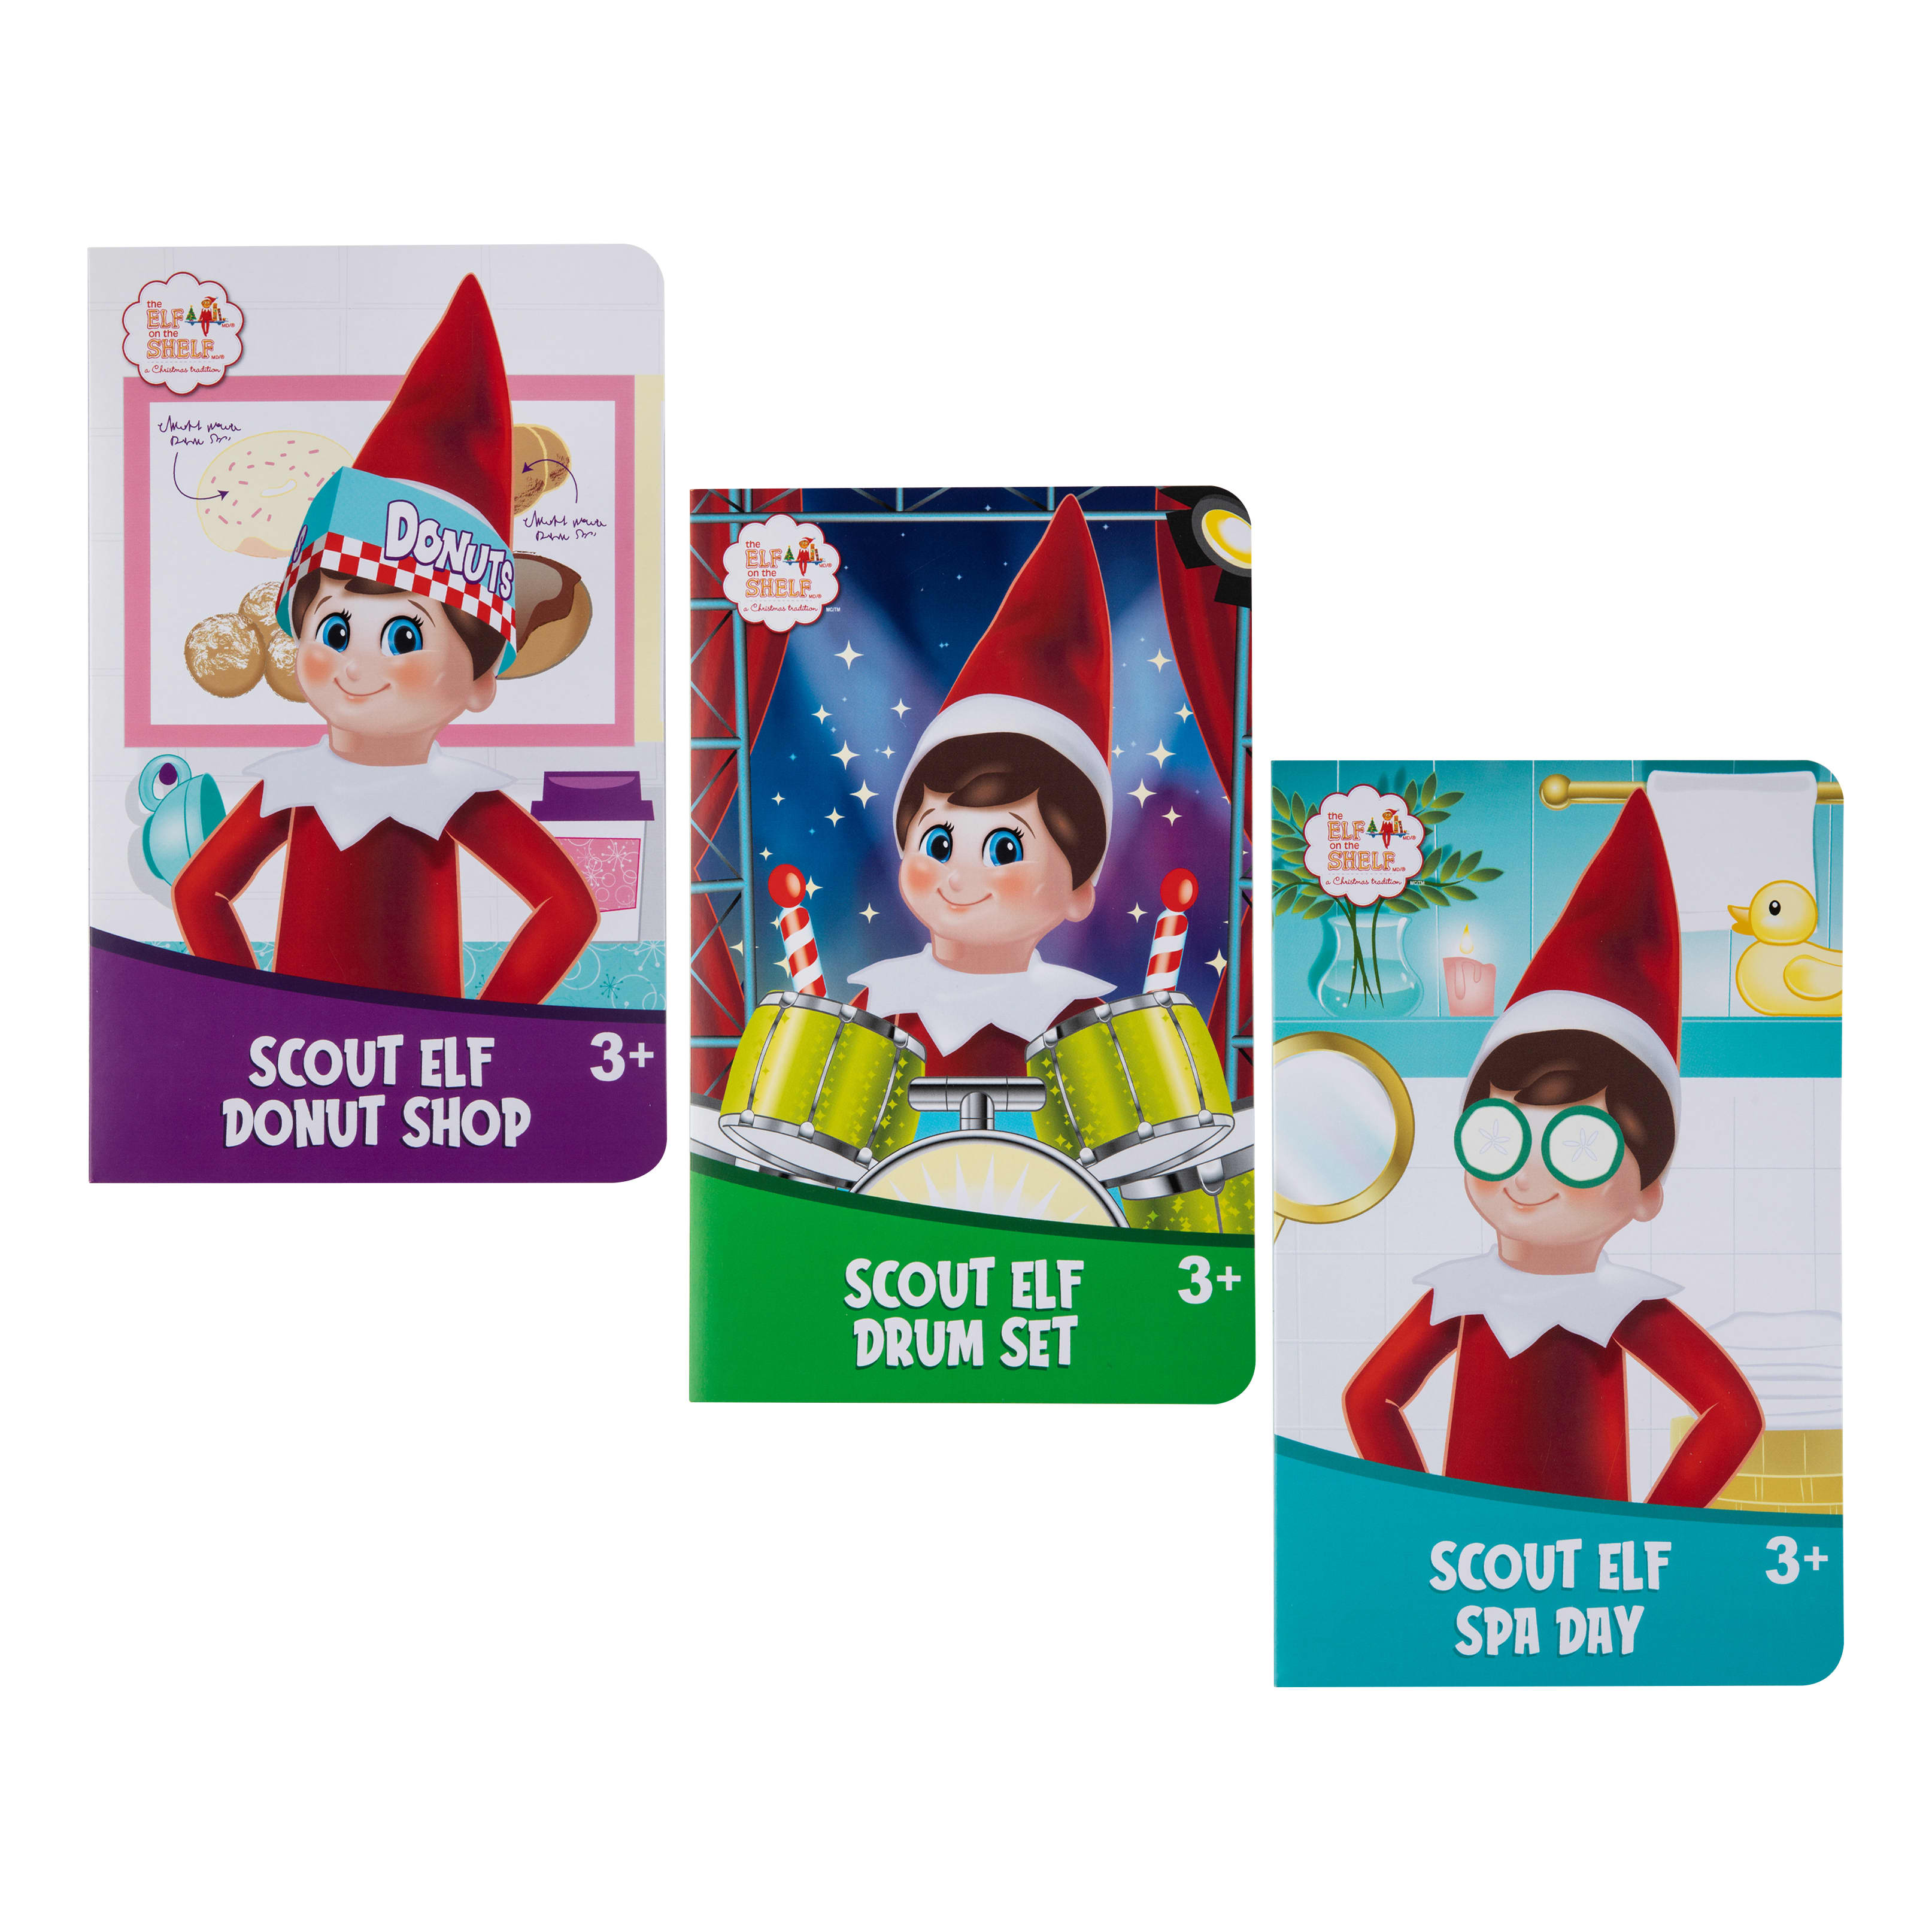 Elf on the Shelf Scout Elves at Play® Insta-Moment Pop-Ups - Series 2